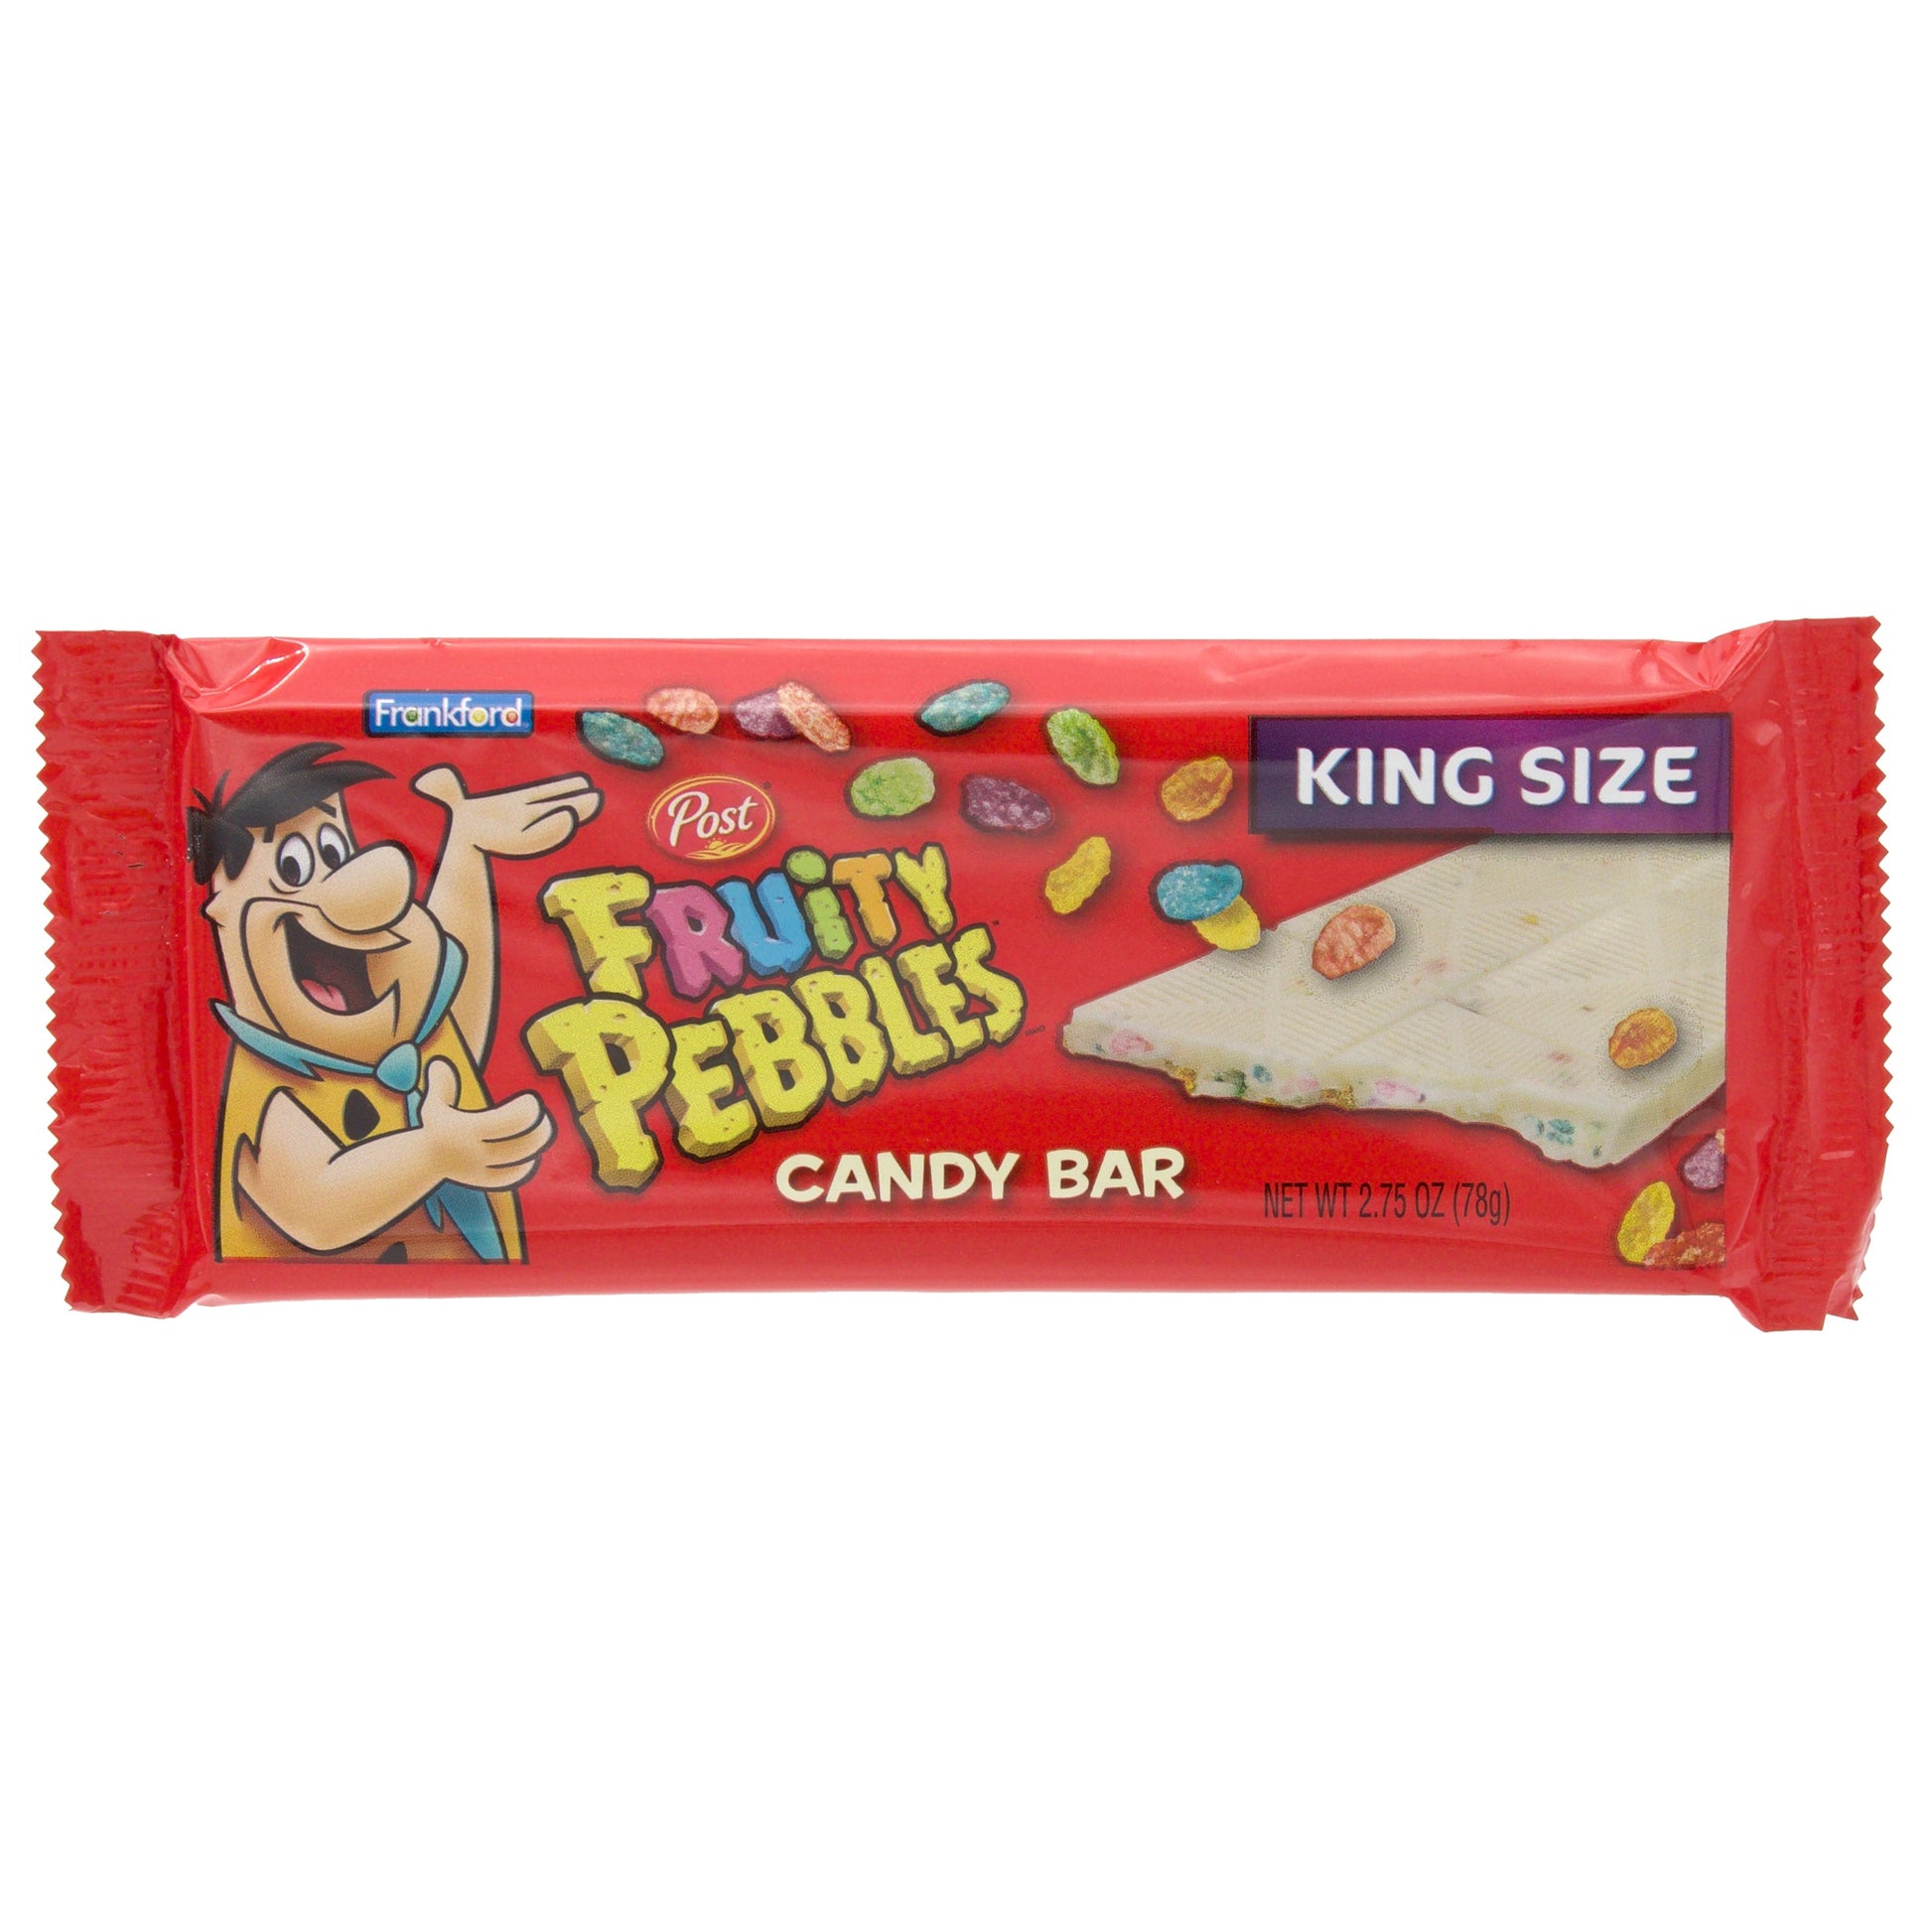 Red candy bar wrapper with fruity pebbles and Fred Flinstone